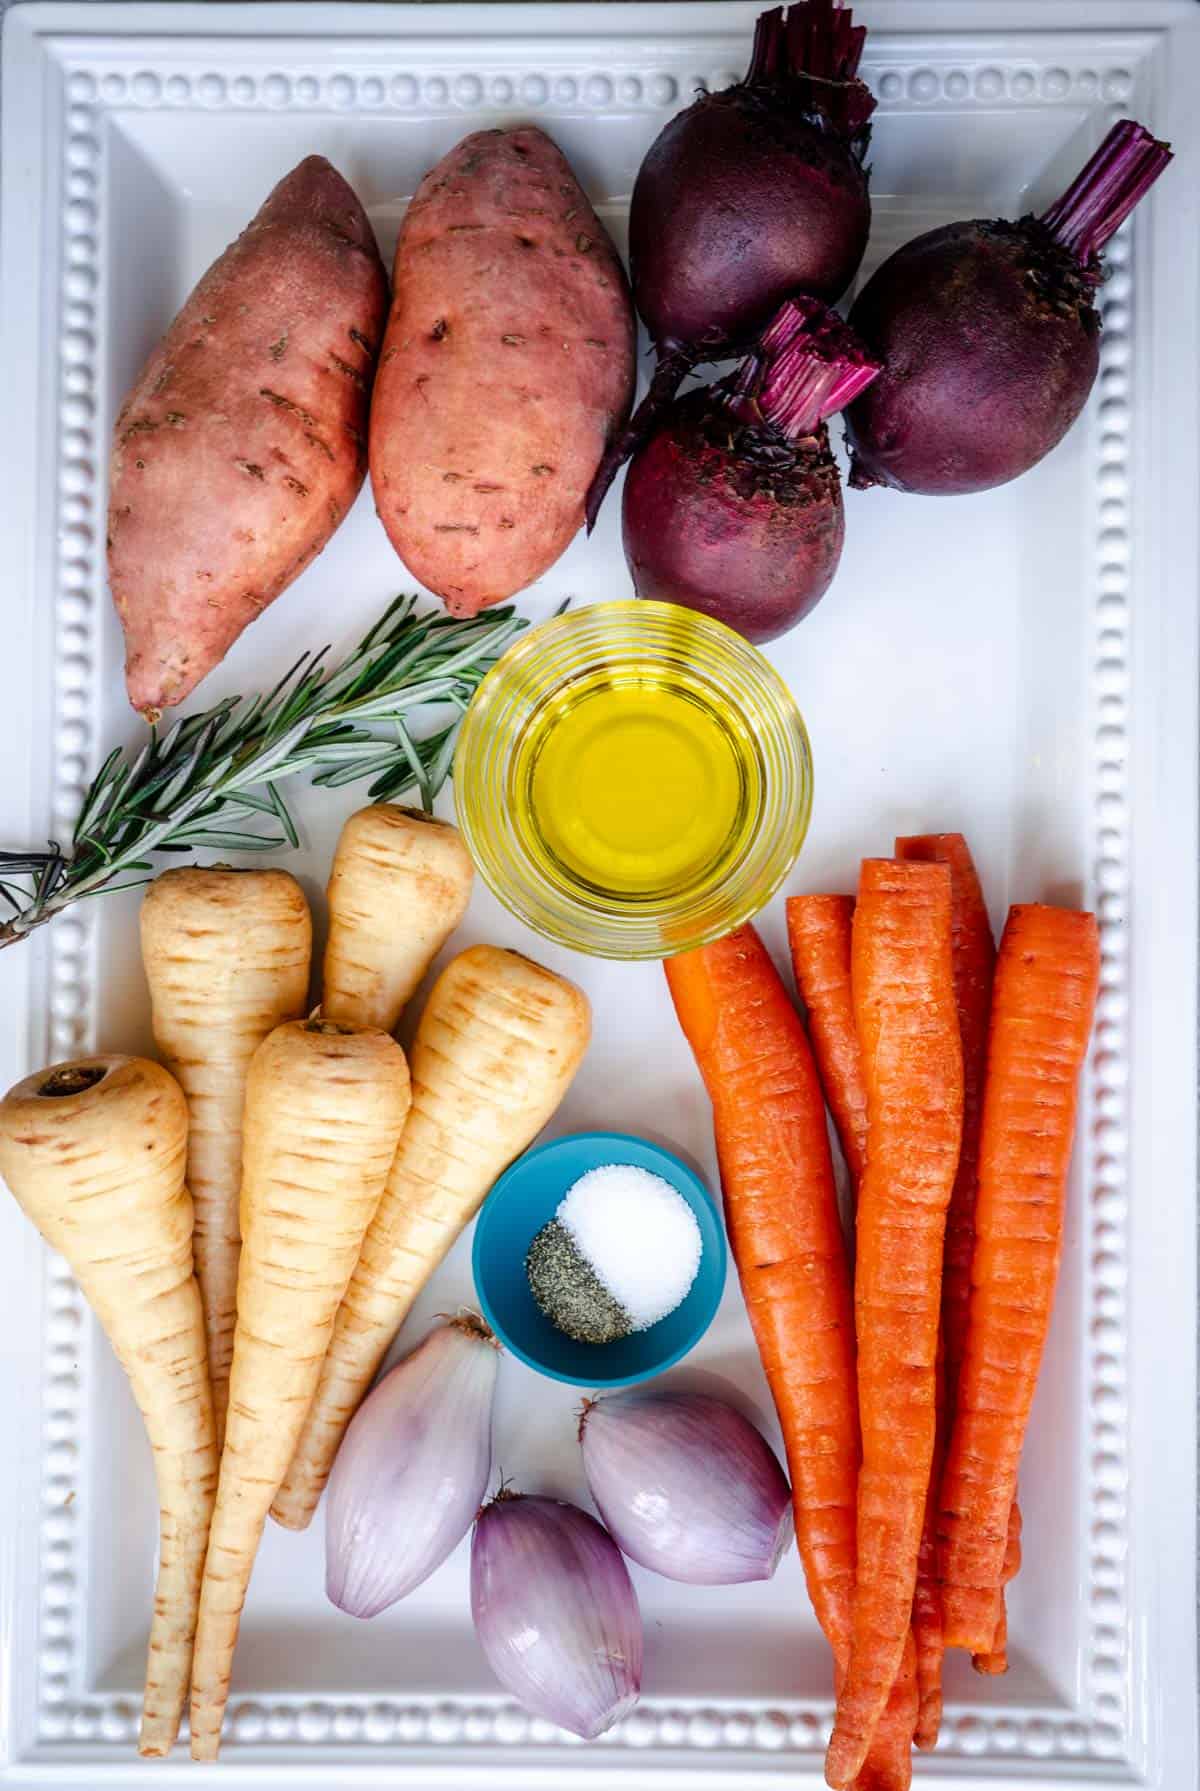 ingredients to make roasted root vegetables, sweet potatoes, beetroots, carrots, parsnips, olive oil, rosemary, shallots, salt and pepper